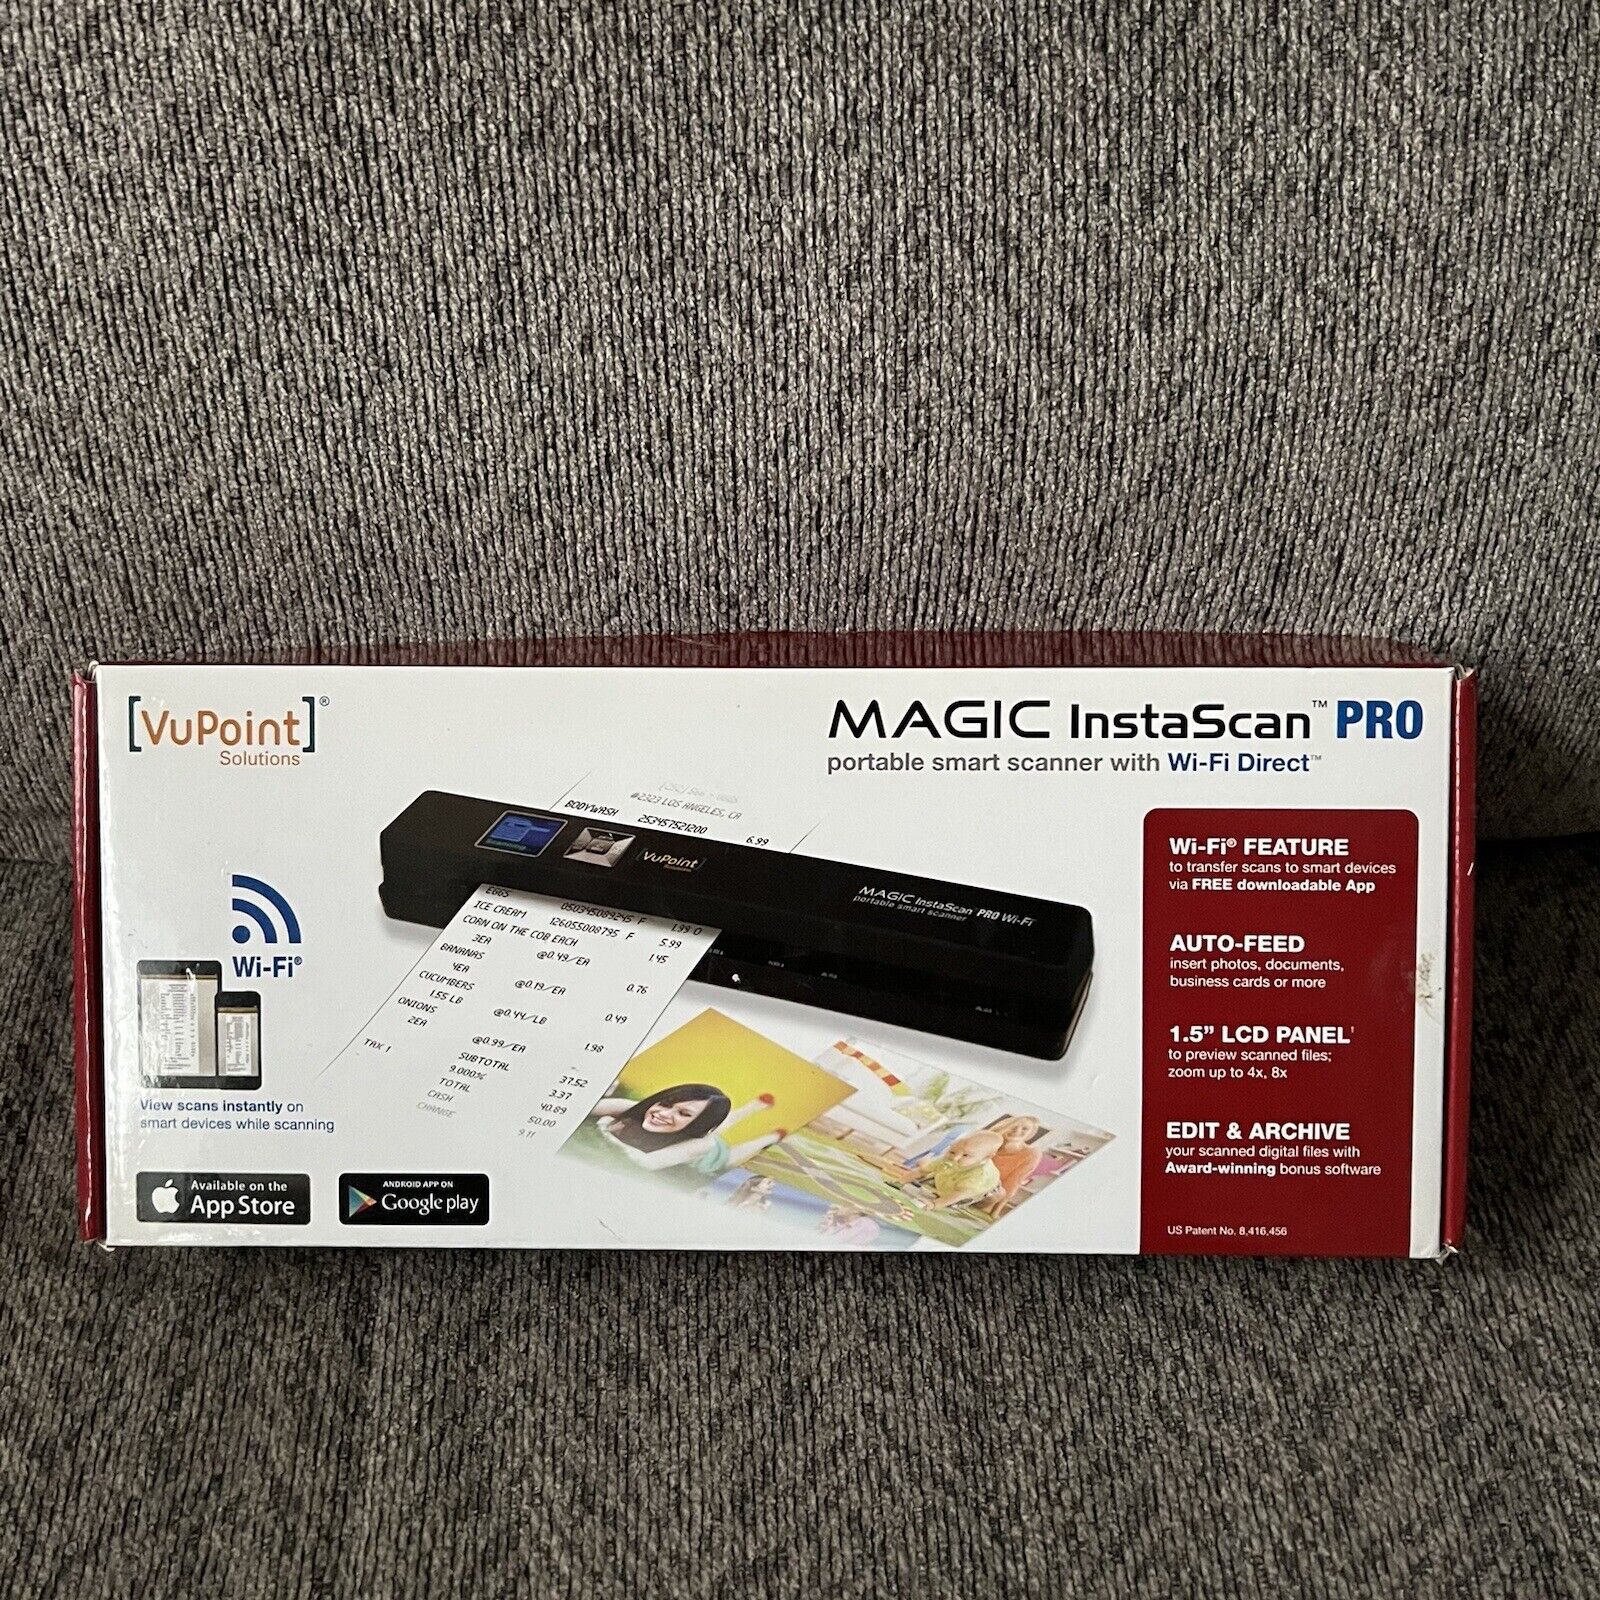 VuPoint Magic InstaScan Pro Wi-Fi Portable Smart Scanner PDSWF-ST48R-VP in RED